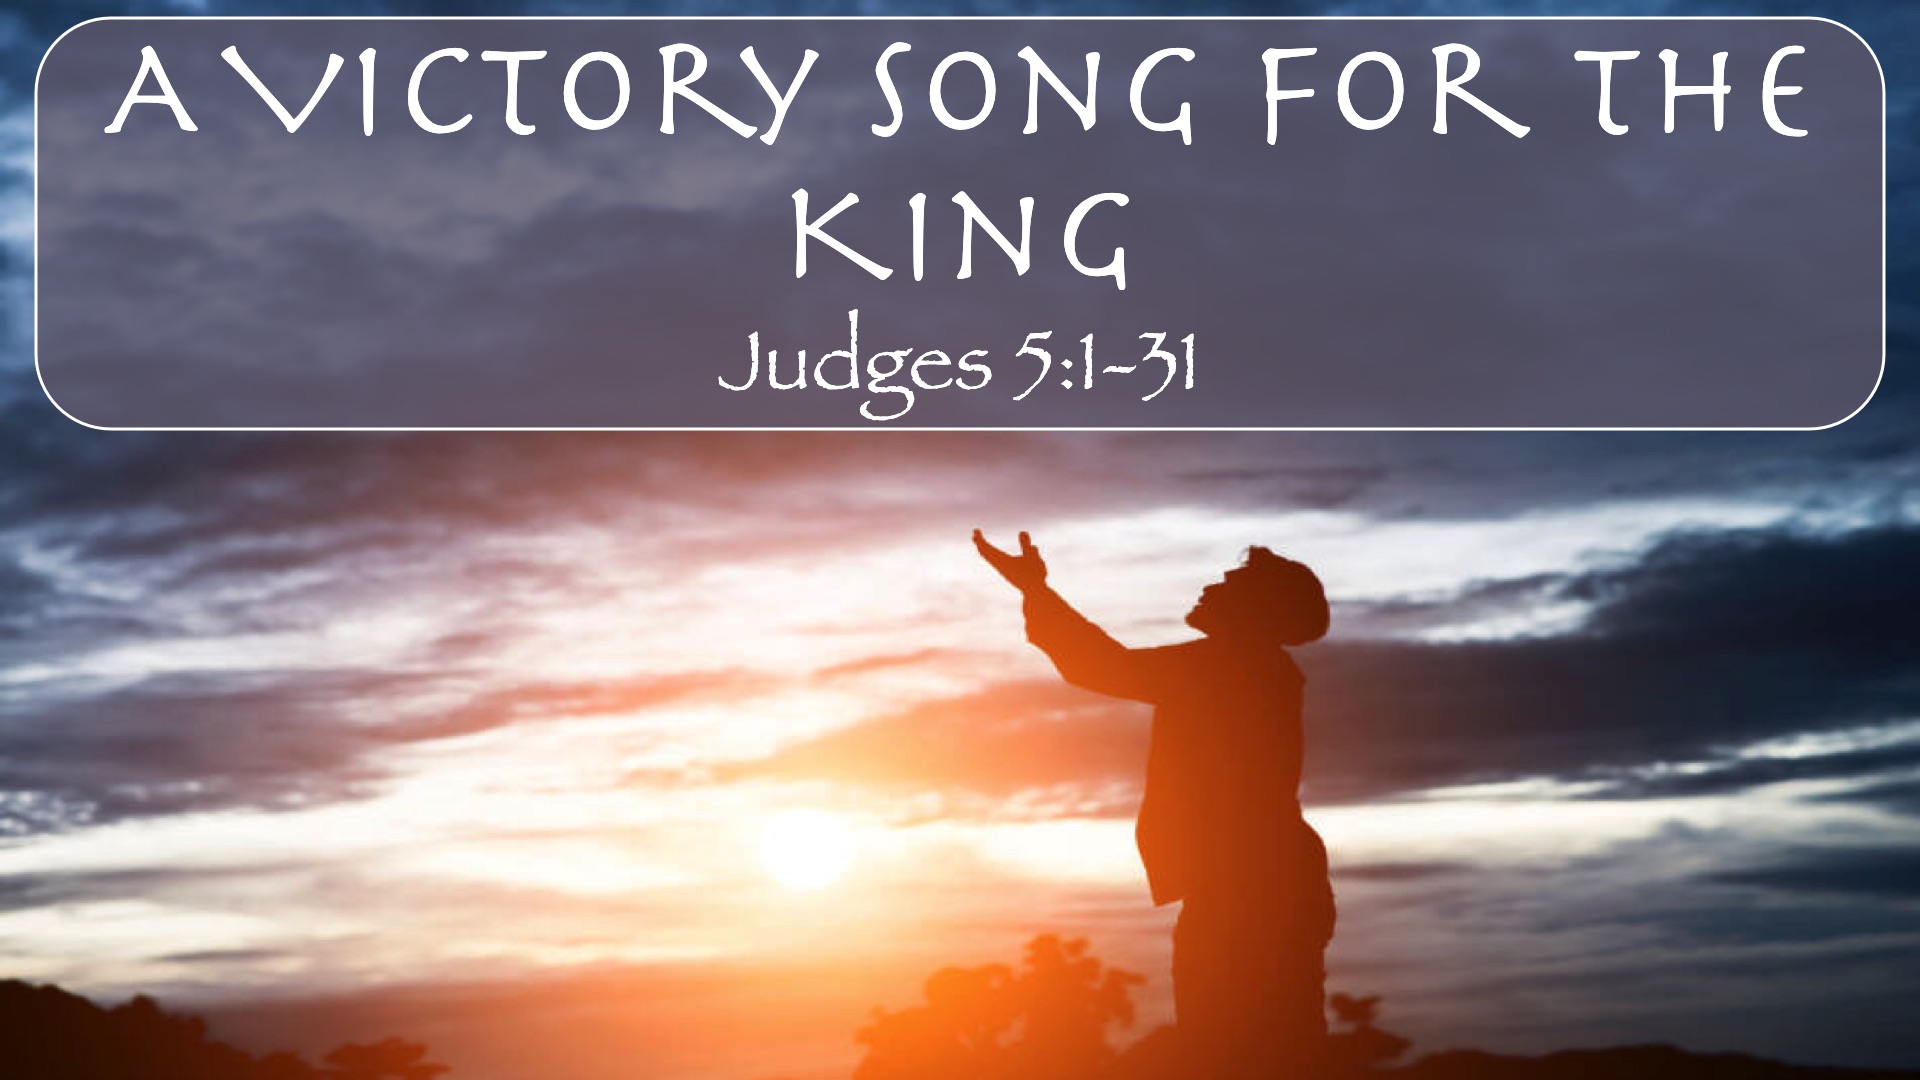 “Fixing Our Eyes on the King: A Victory Song for the King”